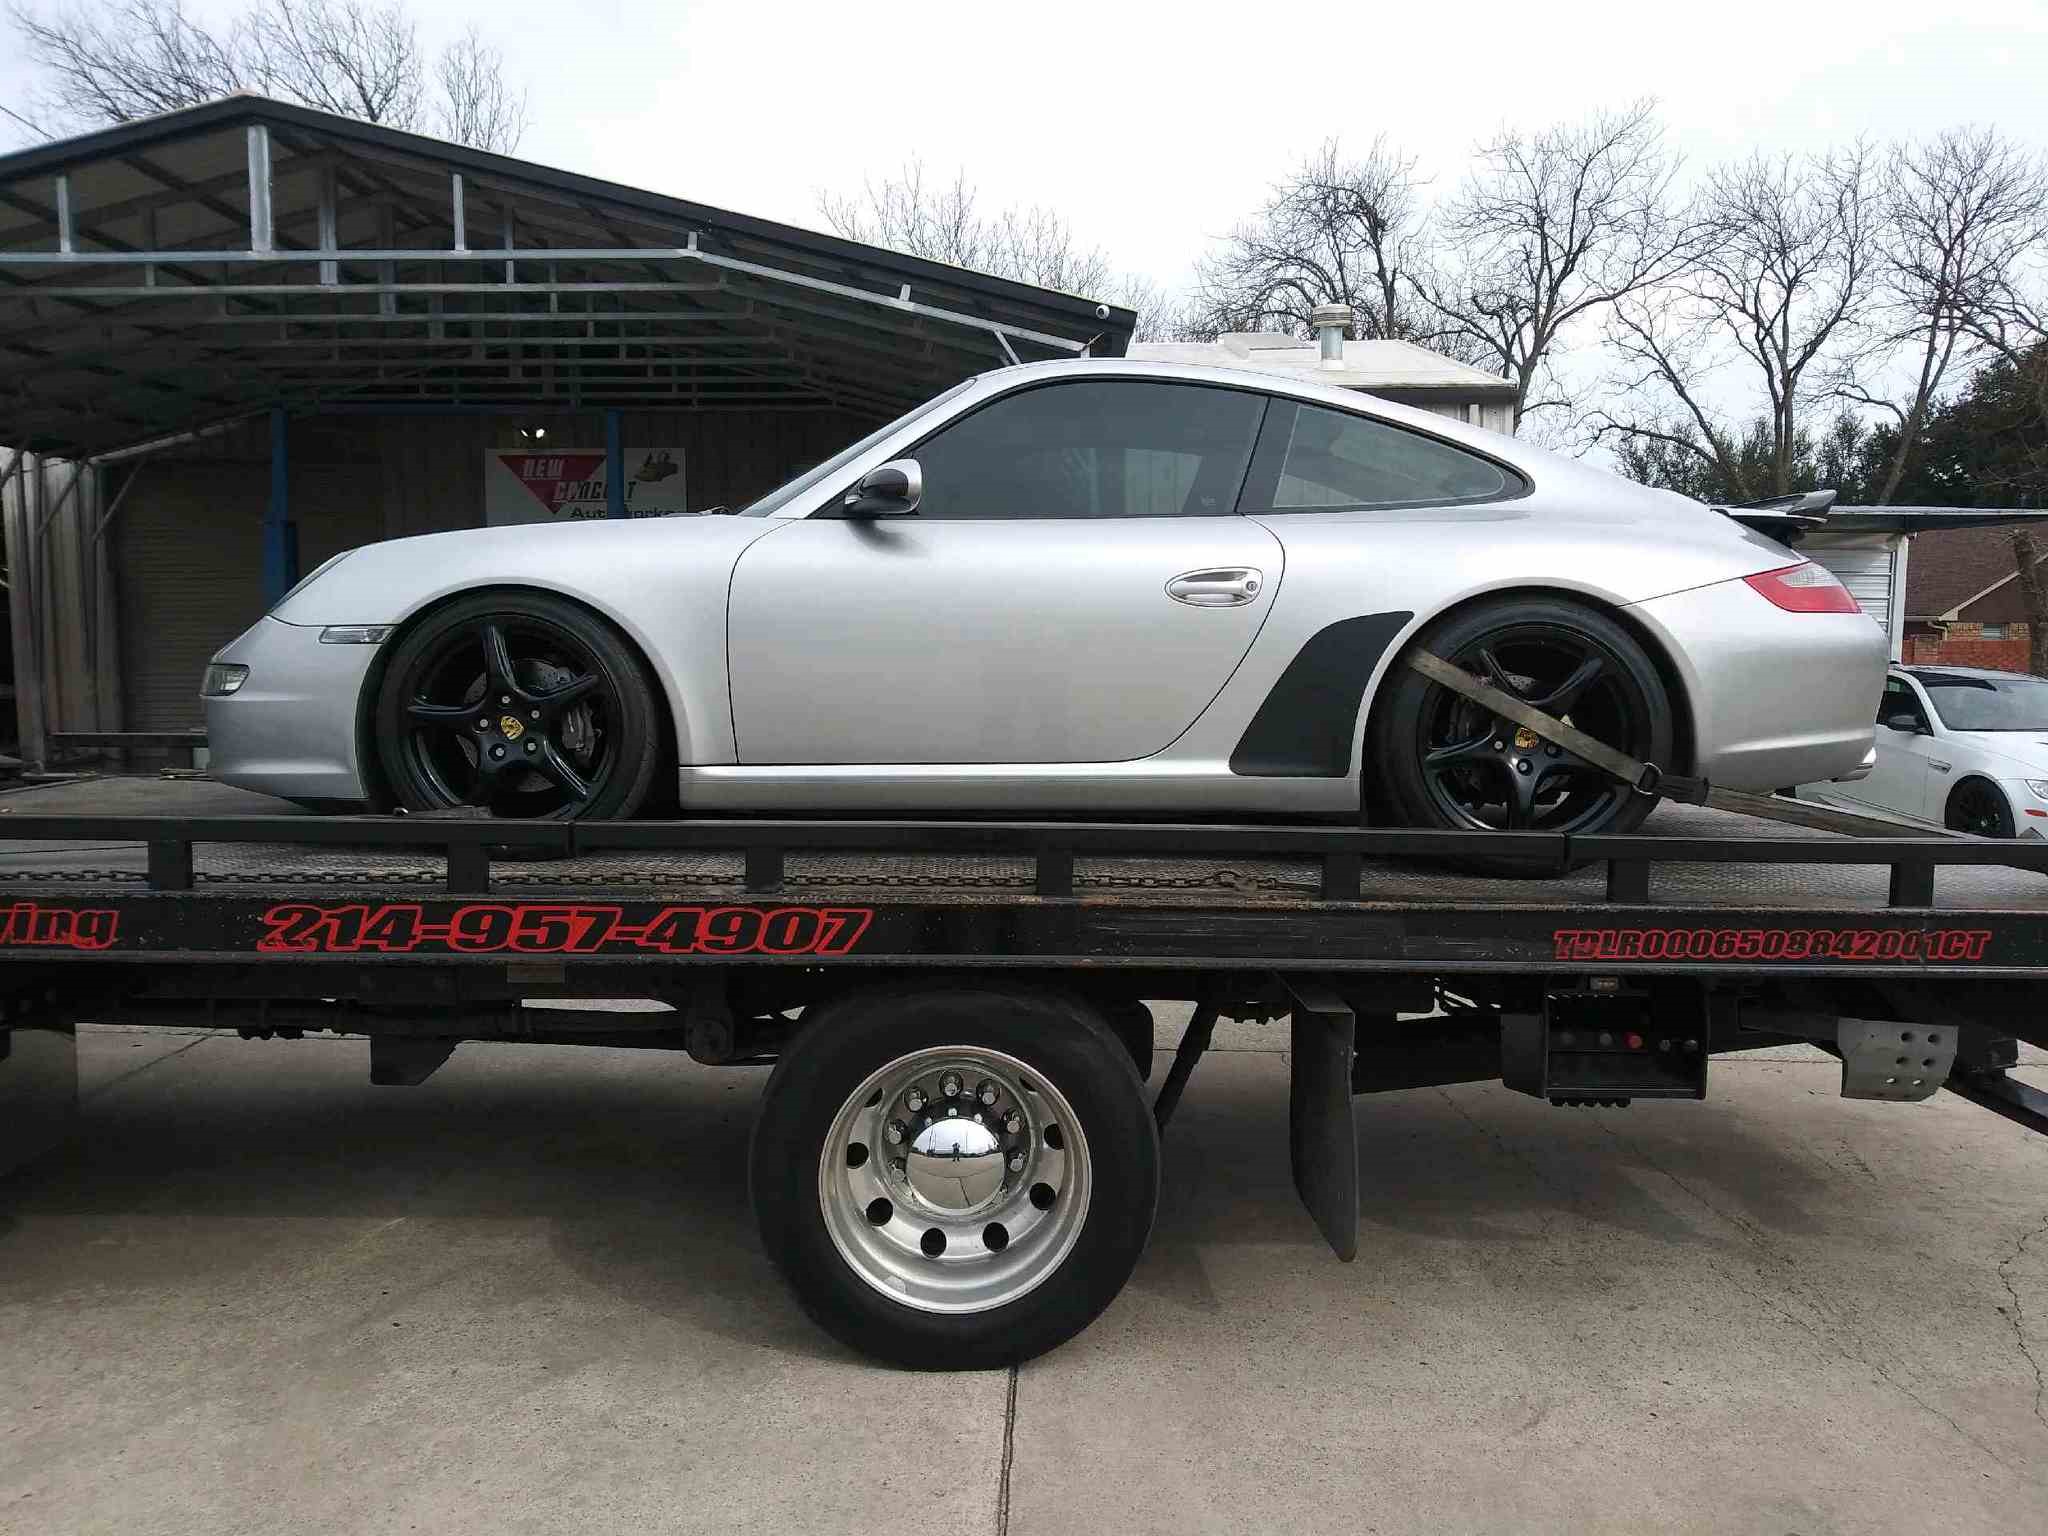 Towing Porsche from East Dallas to Plano, TX